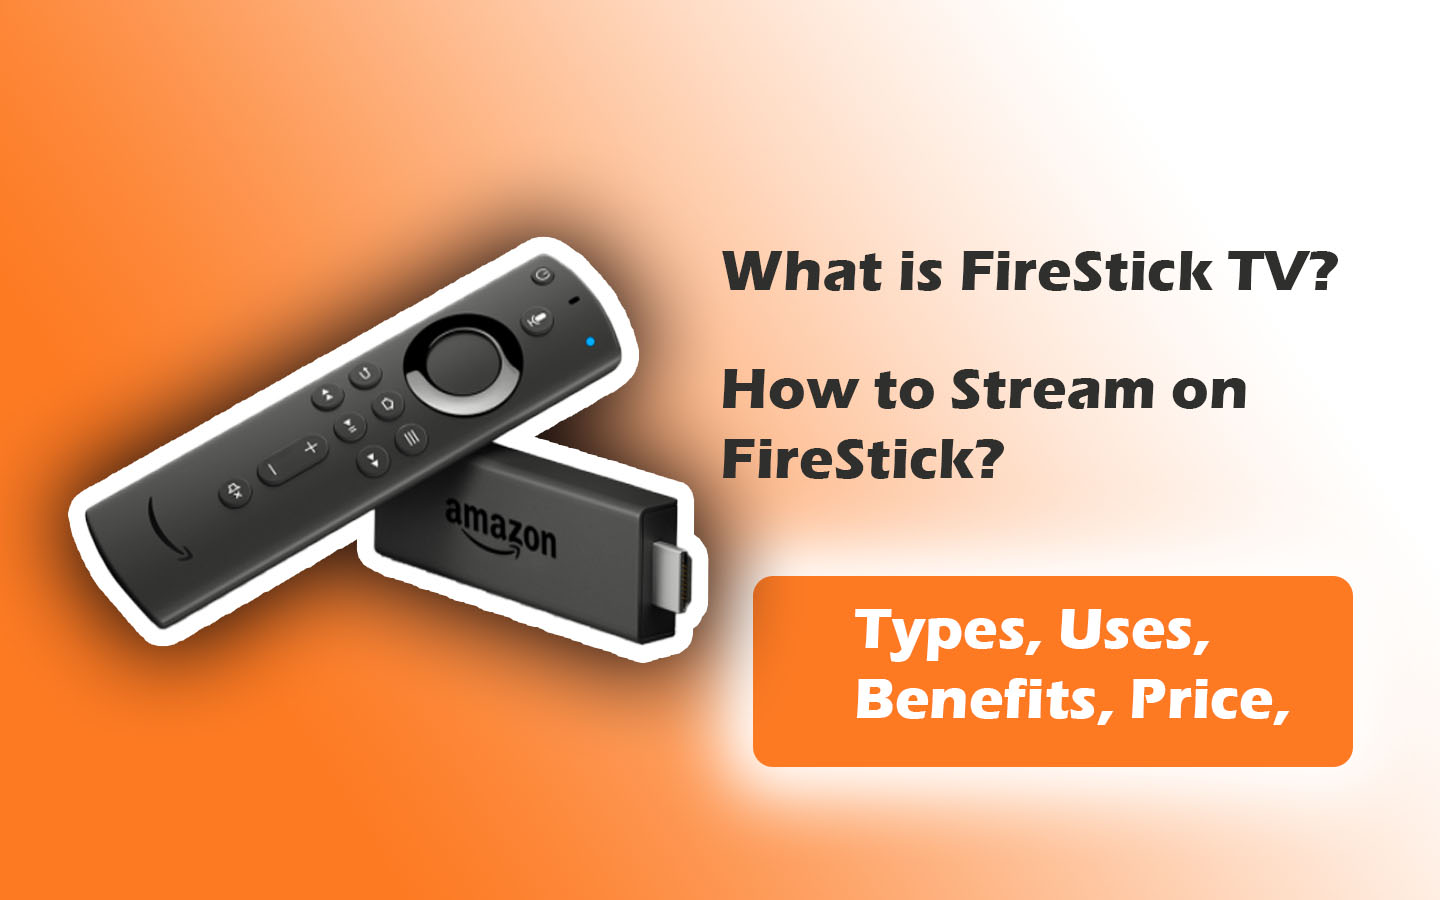 What is Amazon FireStick TV? - How to stream on Firestick, Benefits, Uses 2021